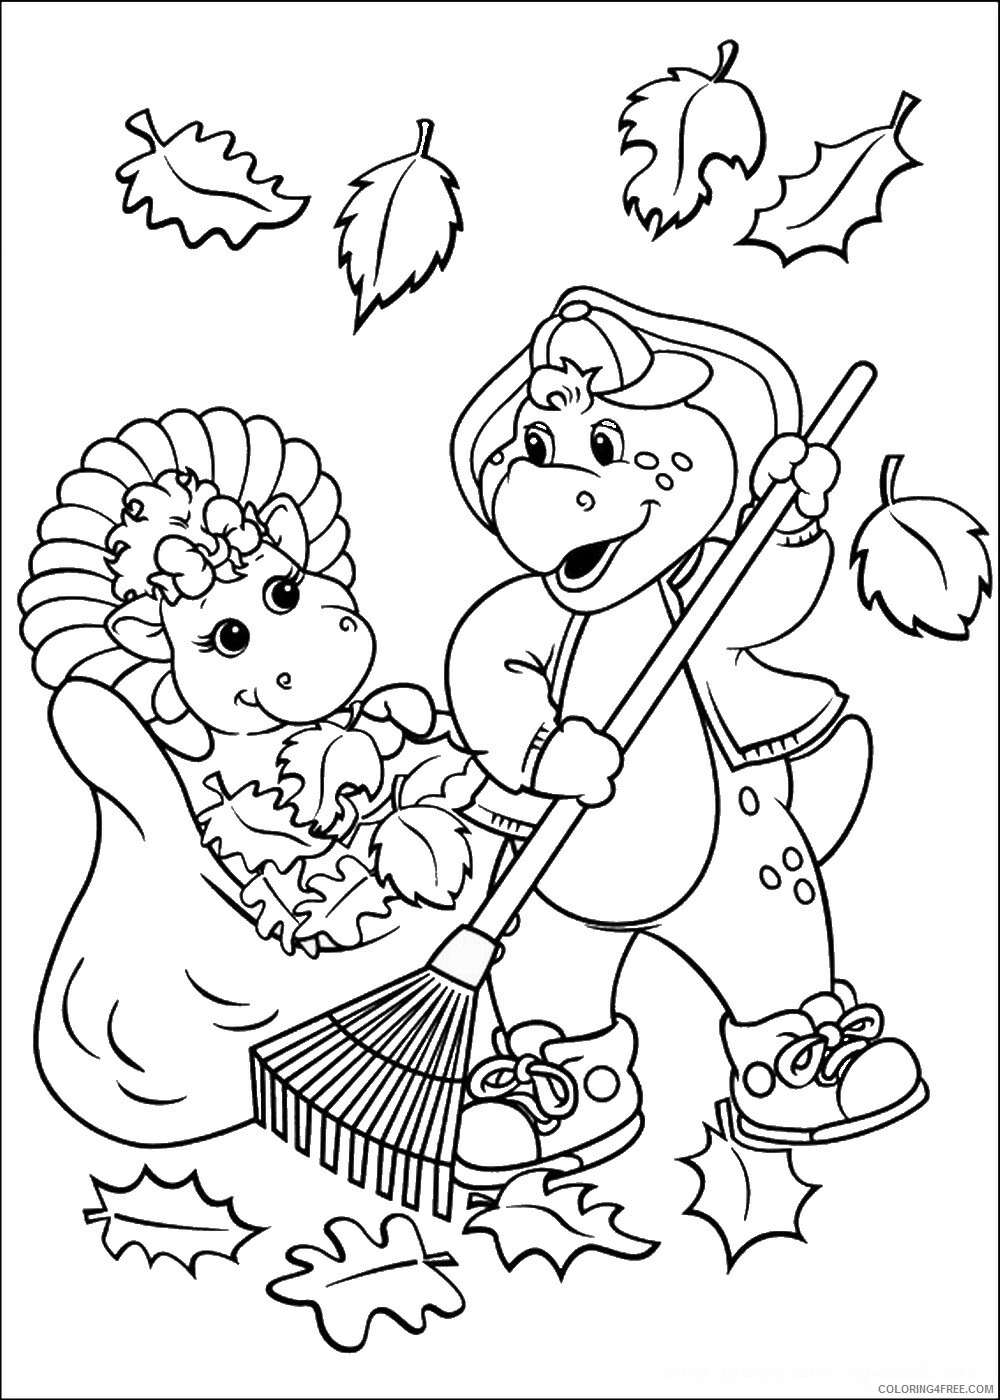 Barney and Friends Coloring Pages TV Film barney_cl_1047 Printable 2020 00620 Coloring4free